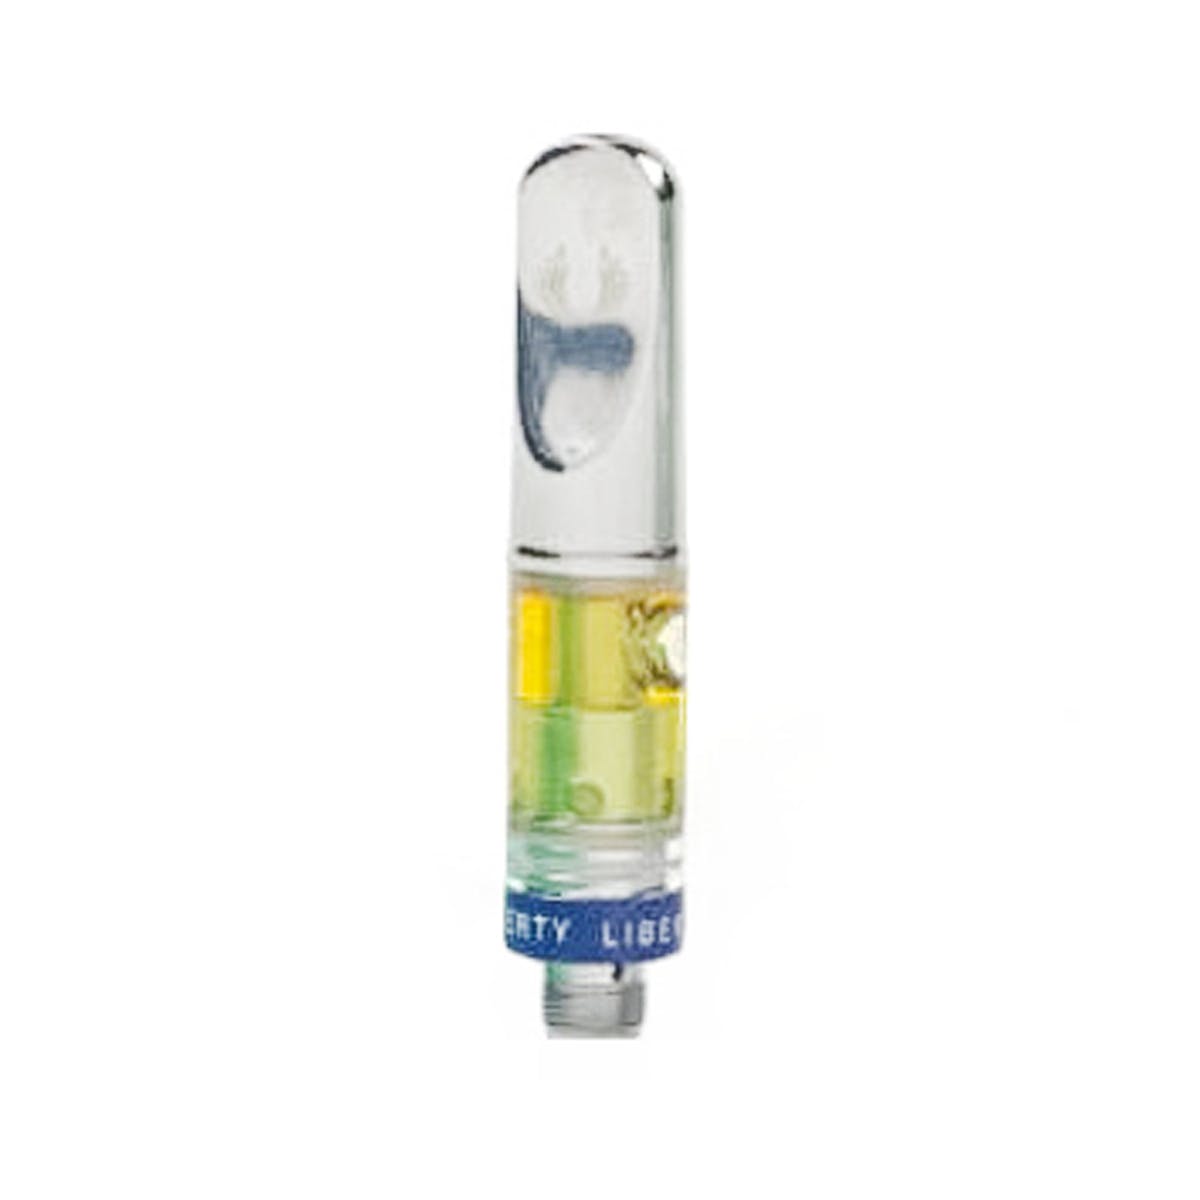 Tranquility Oil Cartridge